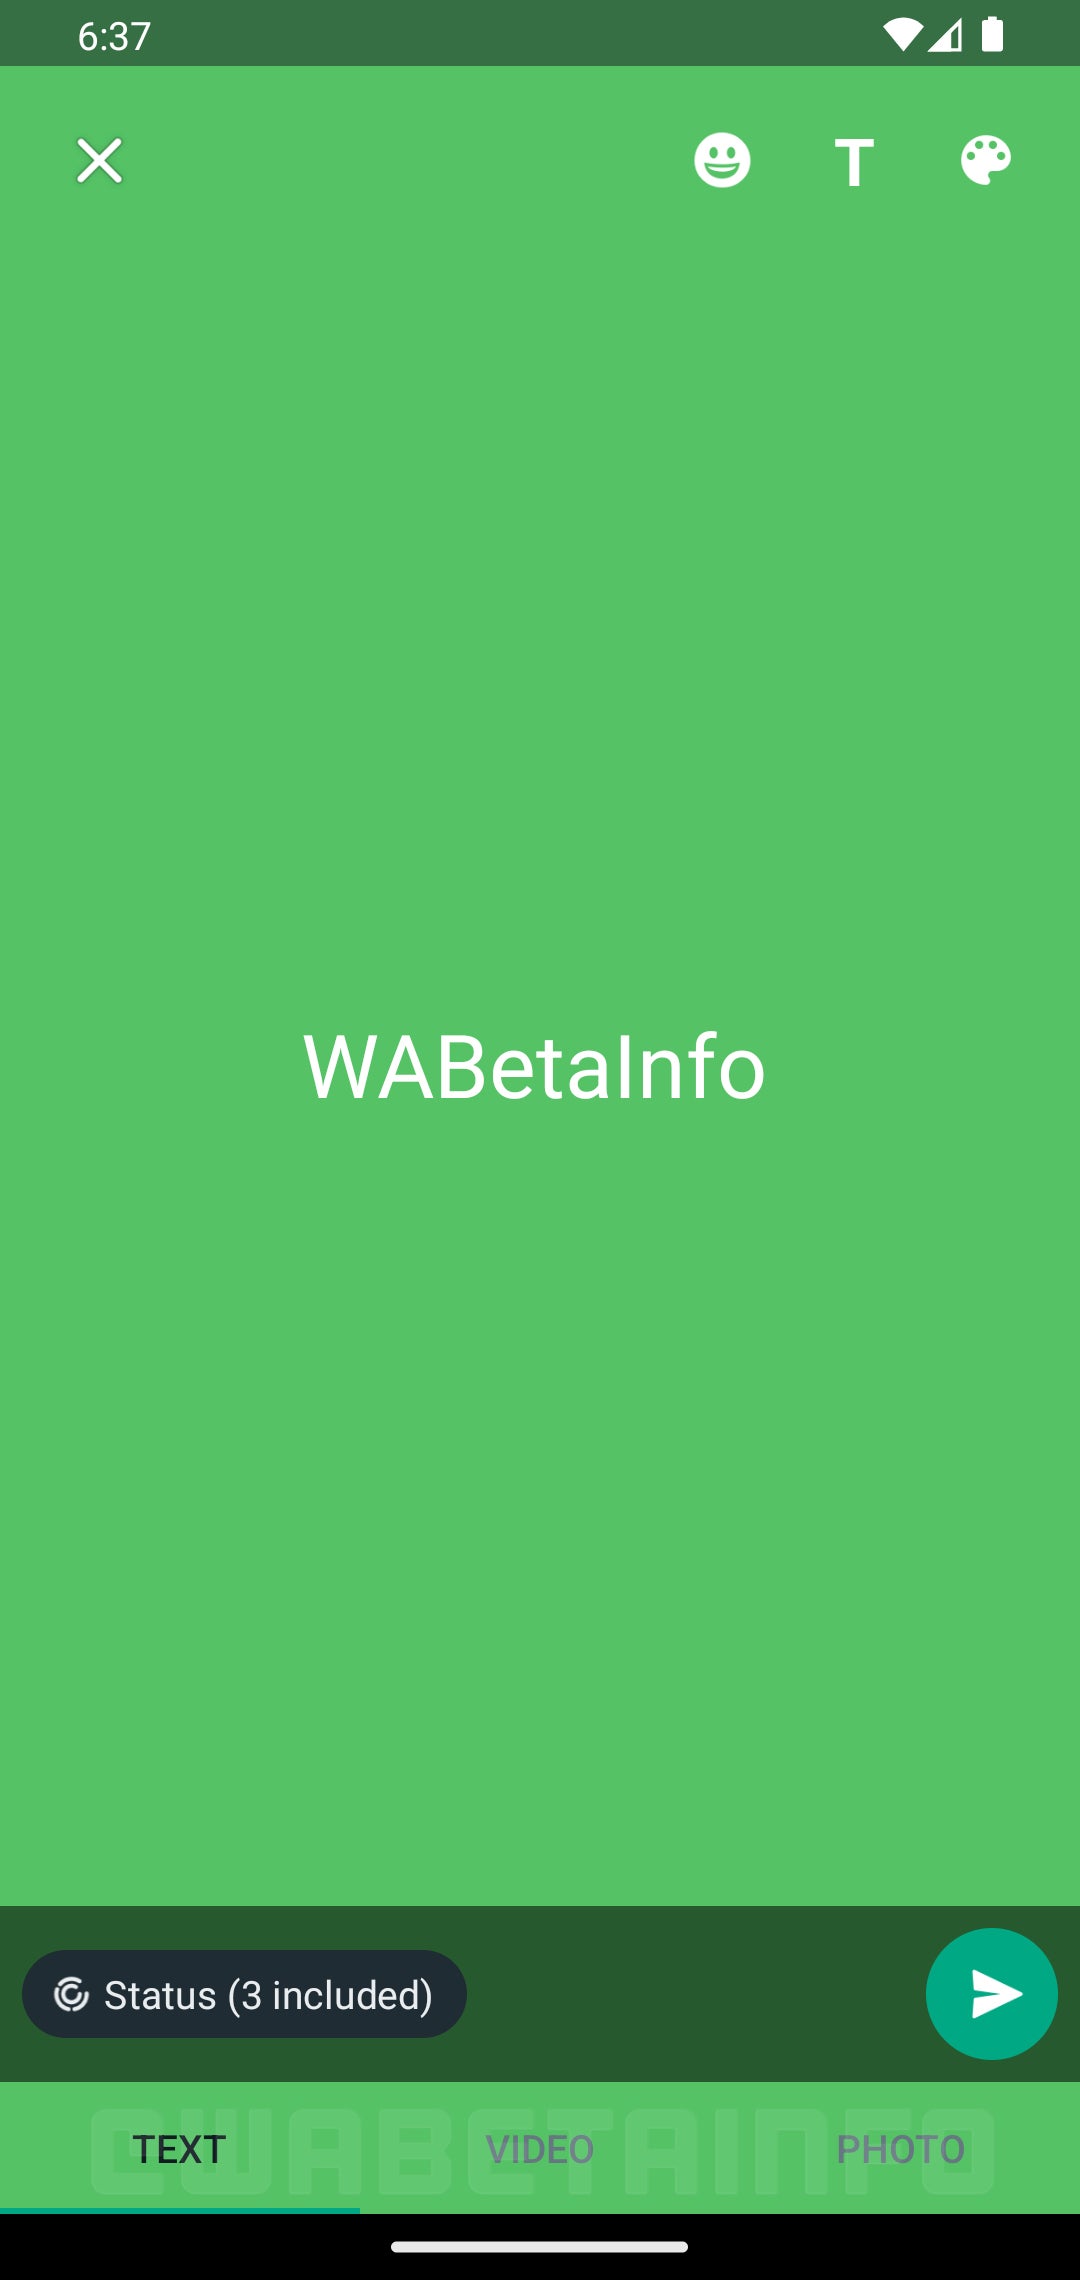 Image credit – WABetaInfo – WhatsApp is testing a new interface to easily share status updates in text form